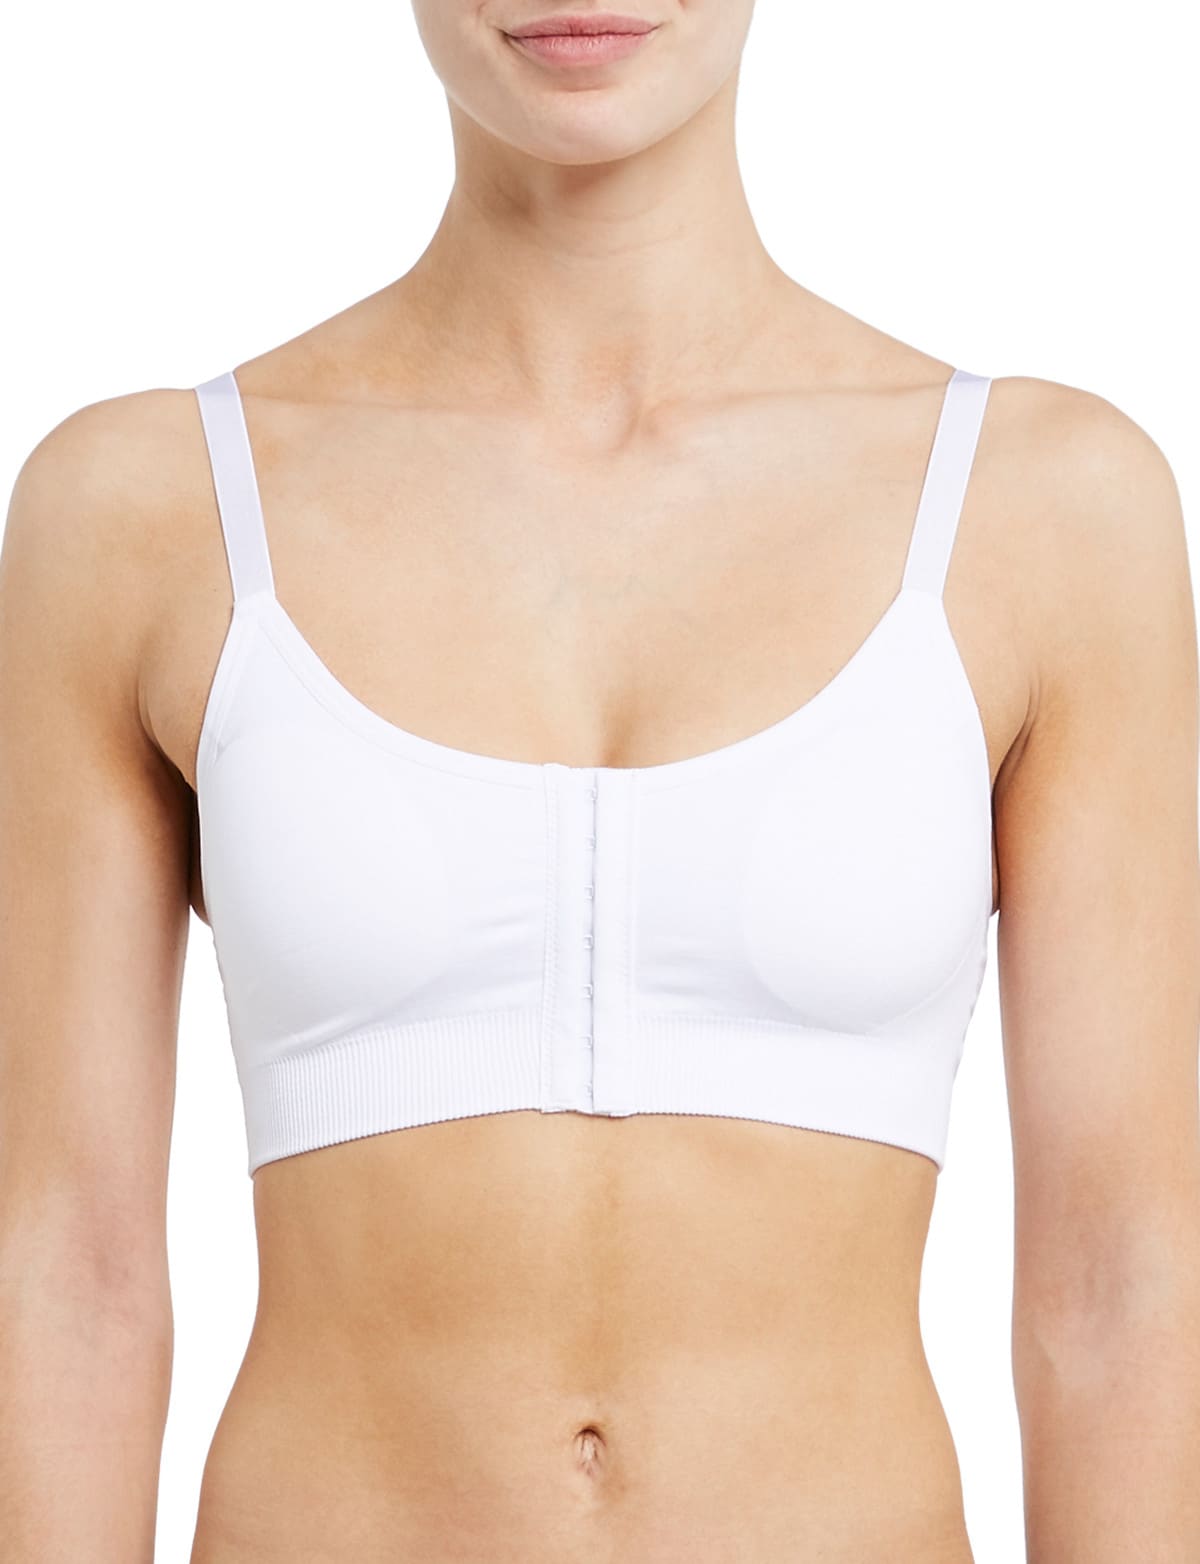 Clique Super Support Bra - White – Fearless Wanaka